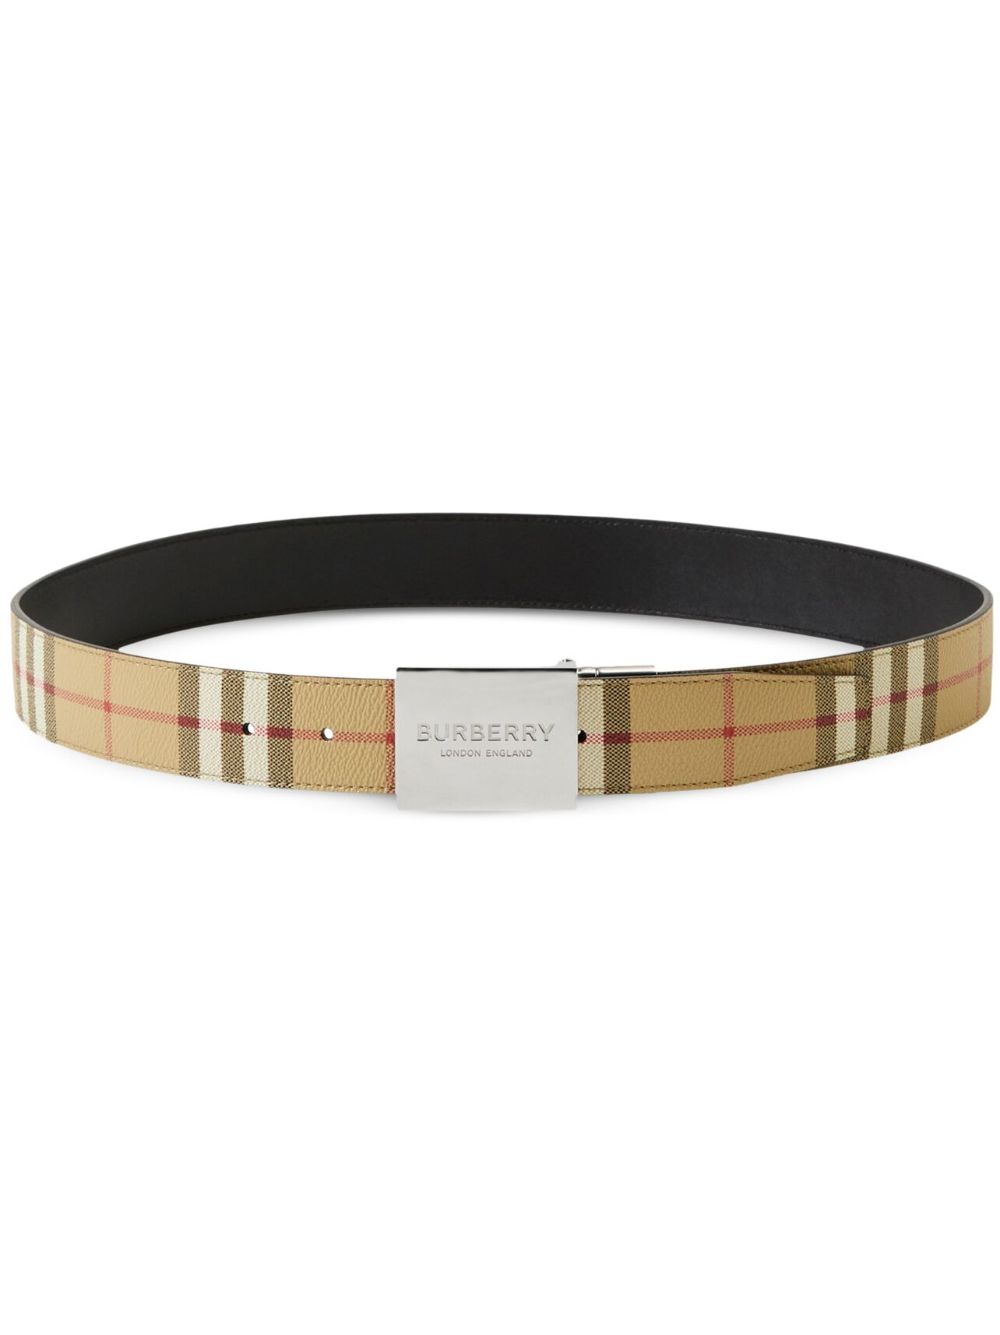 BURBERRY Reversible Vintage Check And Leather Belt